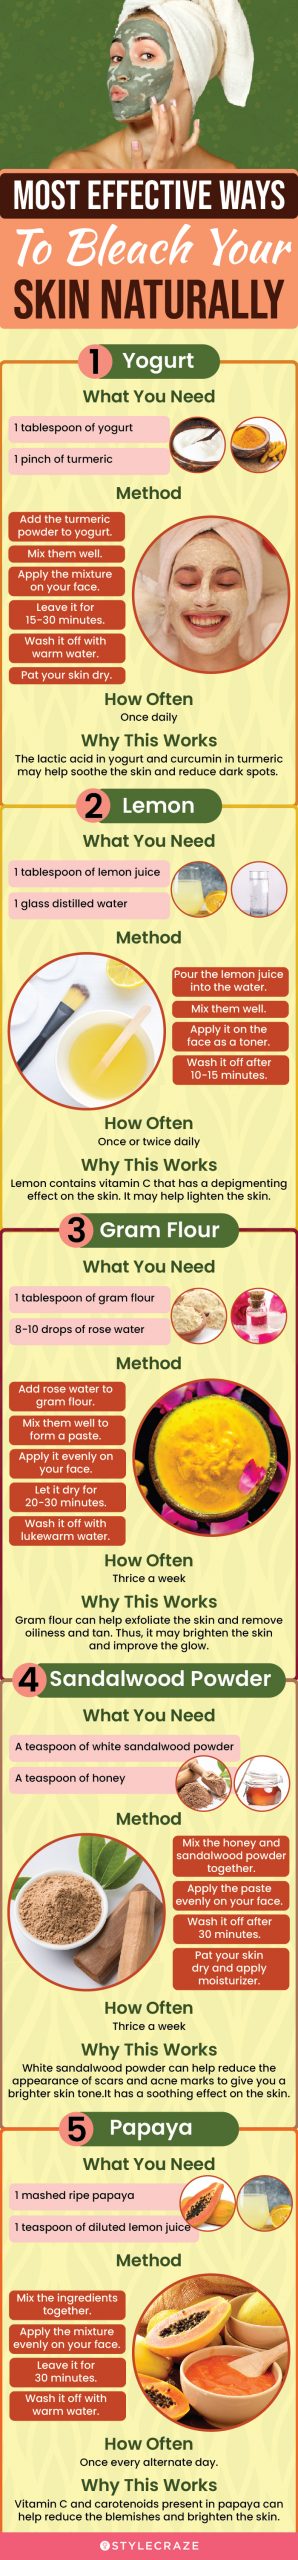 most effective ways to bleach your skin naturally (infographic)